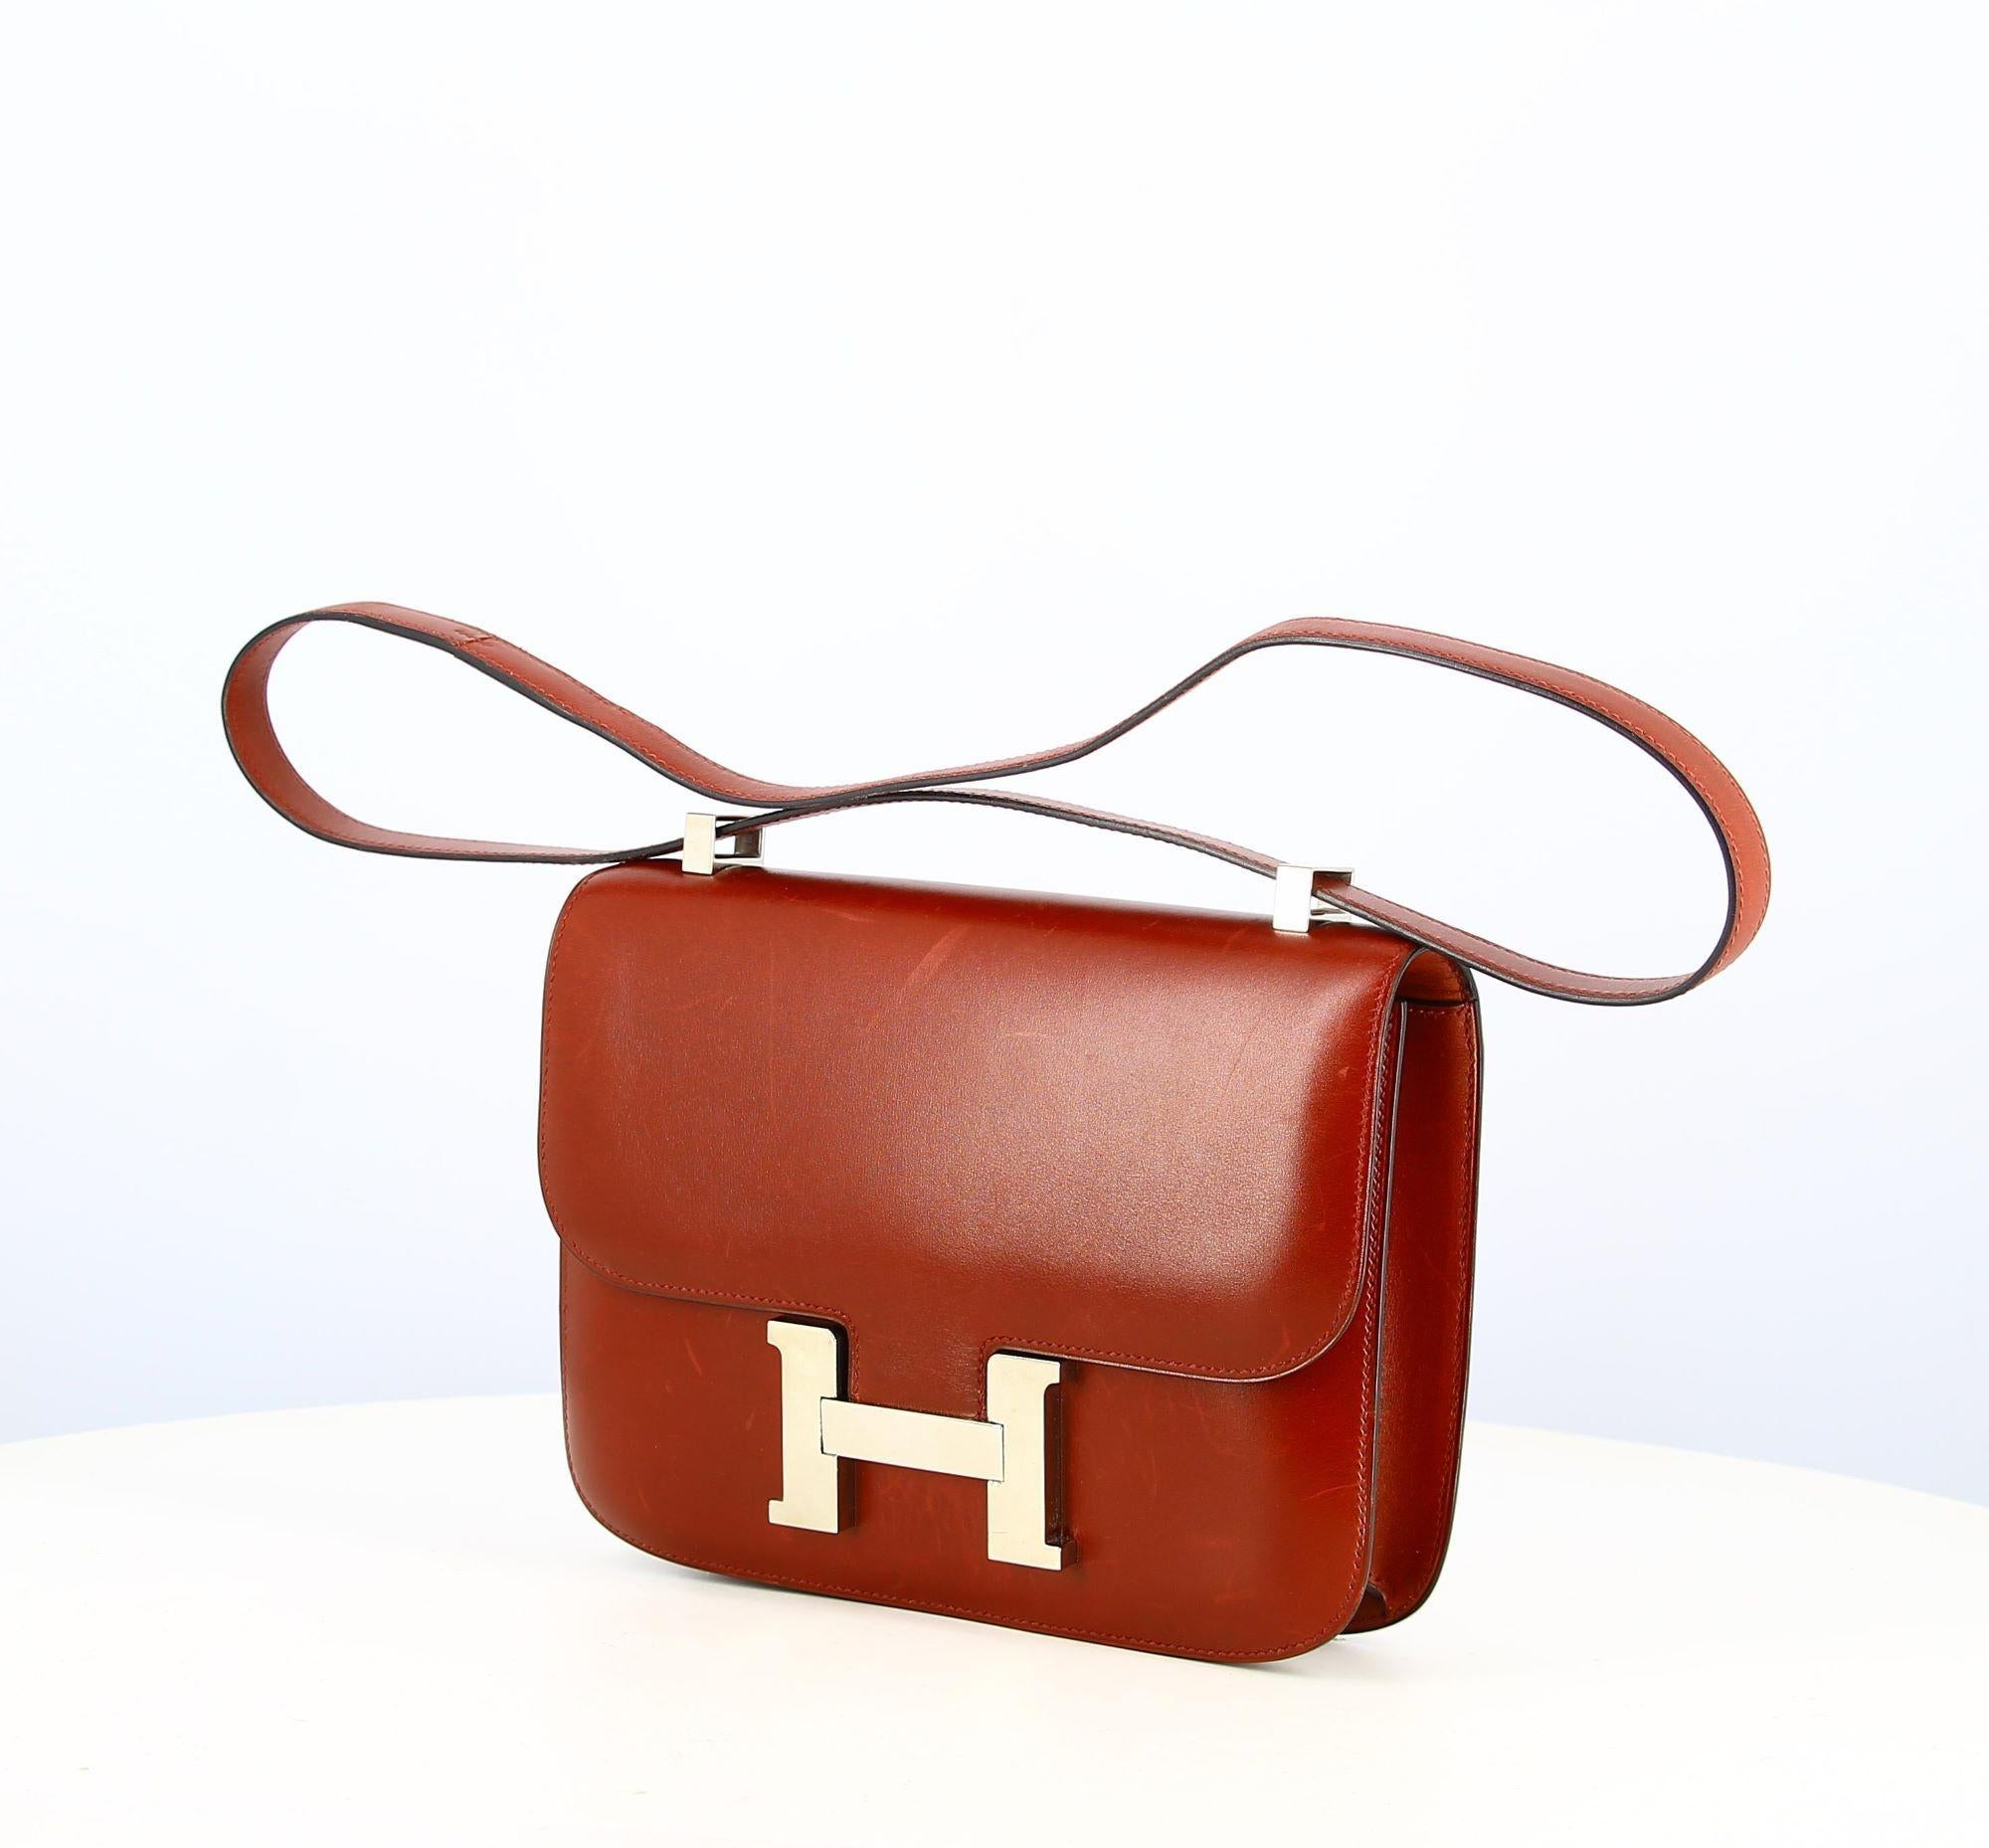 2003 Hermes Handbag Constance in Bordeau Smooth Leather
- Good condition, shows slight wear and tear with time.
- Handbag, smooth burgundy leather, shoulder strap and crossbody, silver H clasp.
- The interior is smooth leather, a zippered pocket,